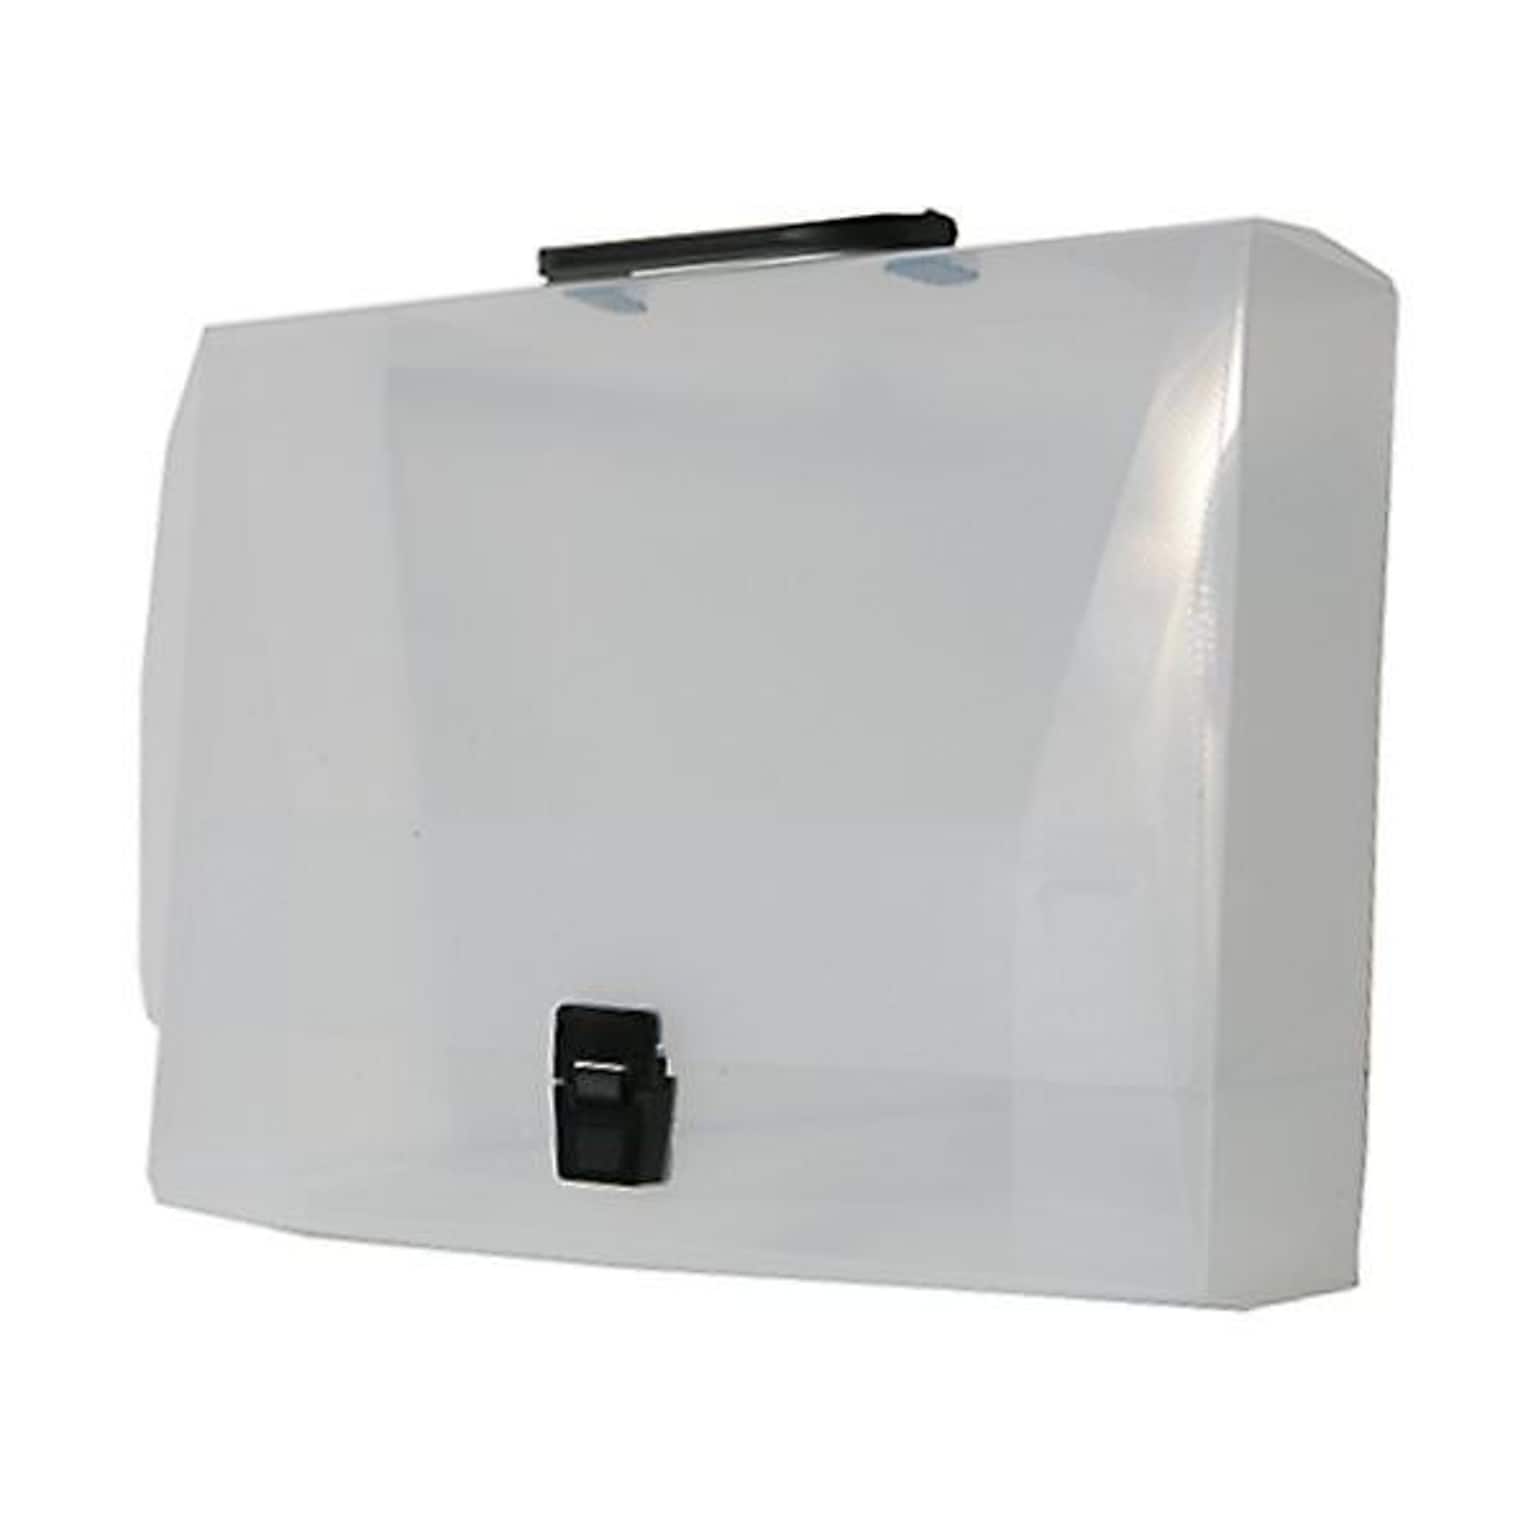 JAM Paper® Plastic Portfolio Briefcase with Handles, Wide, 12 3/4 x 9 1/2 x 3, Clear, Sold Individually (343576)